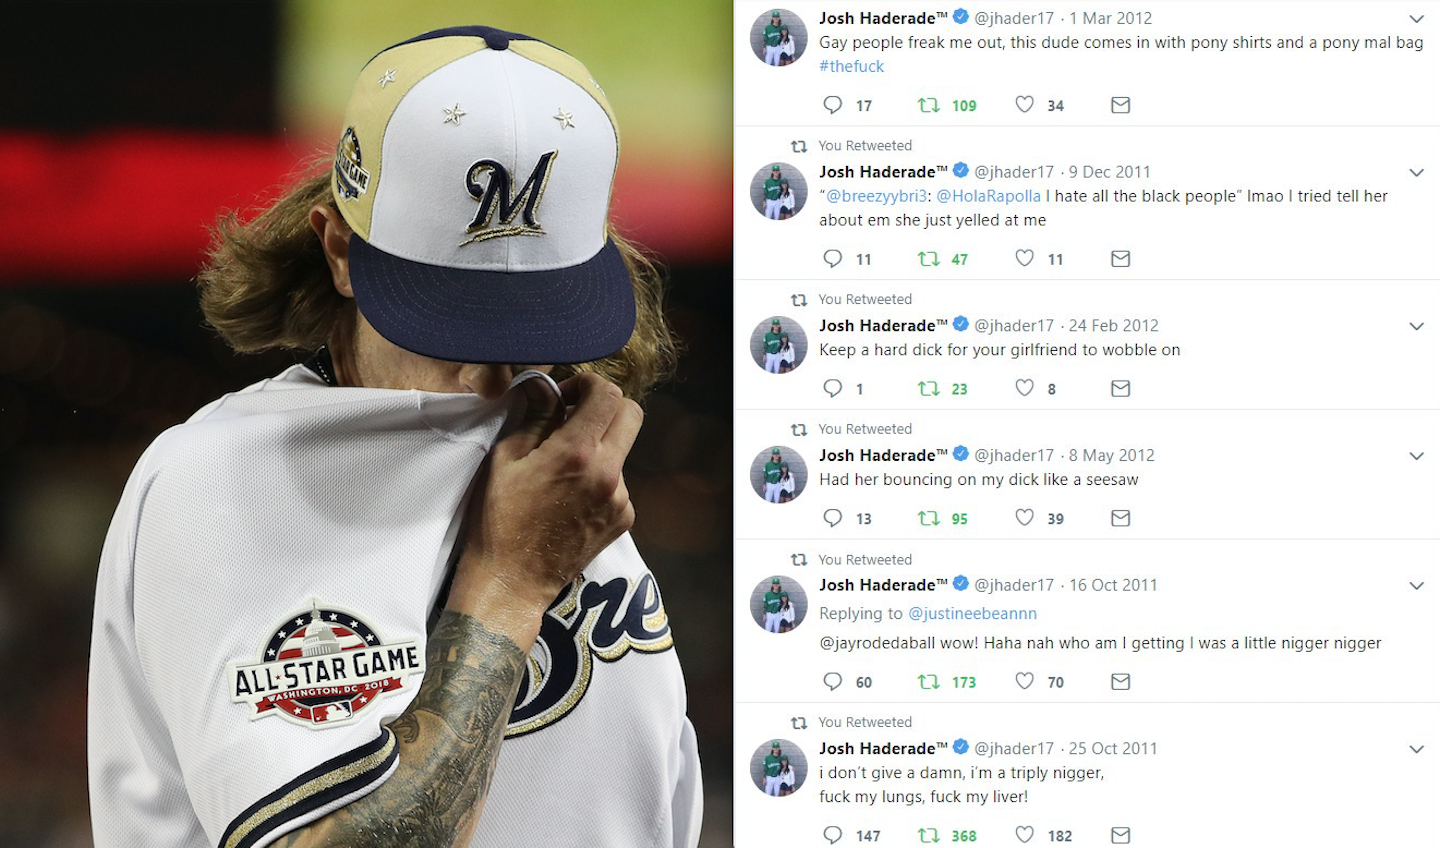 Josh Hader tweets surface during All-Star Game, with offensive language 